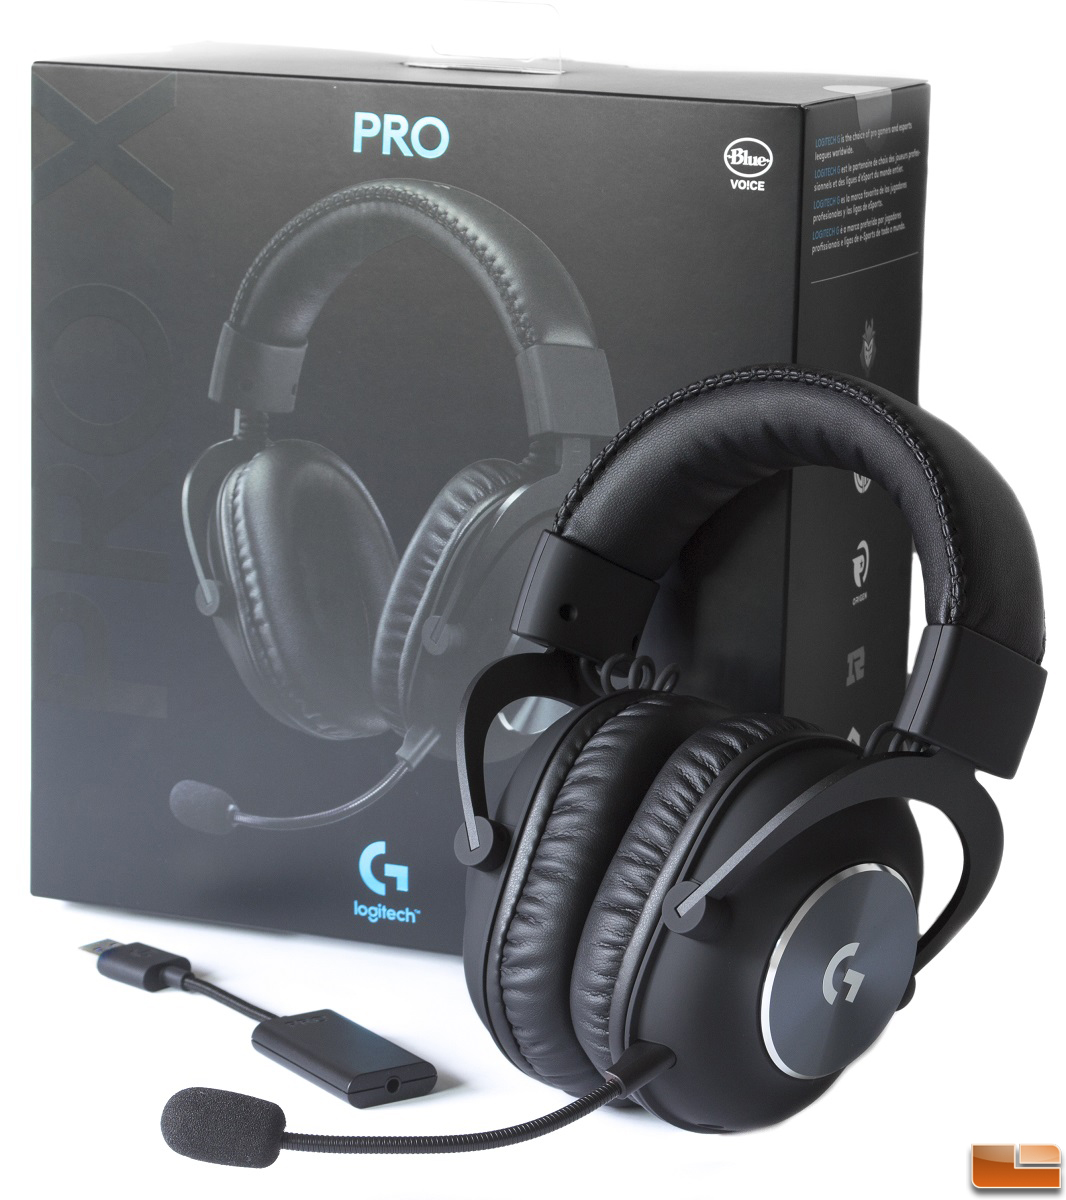 Logitech G PRO X Gaming Headset with Blue VO!CE Review - Legit Reviews